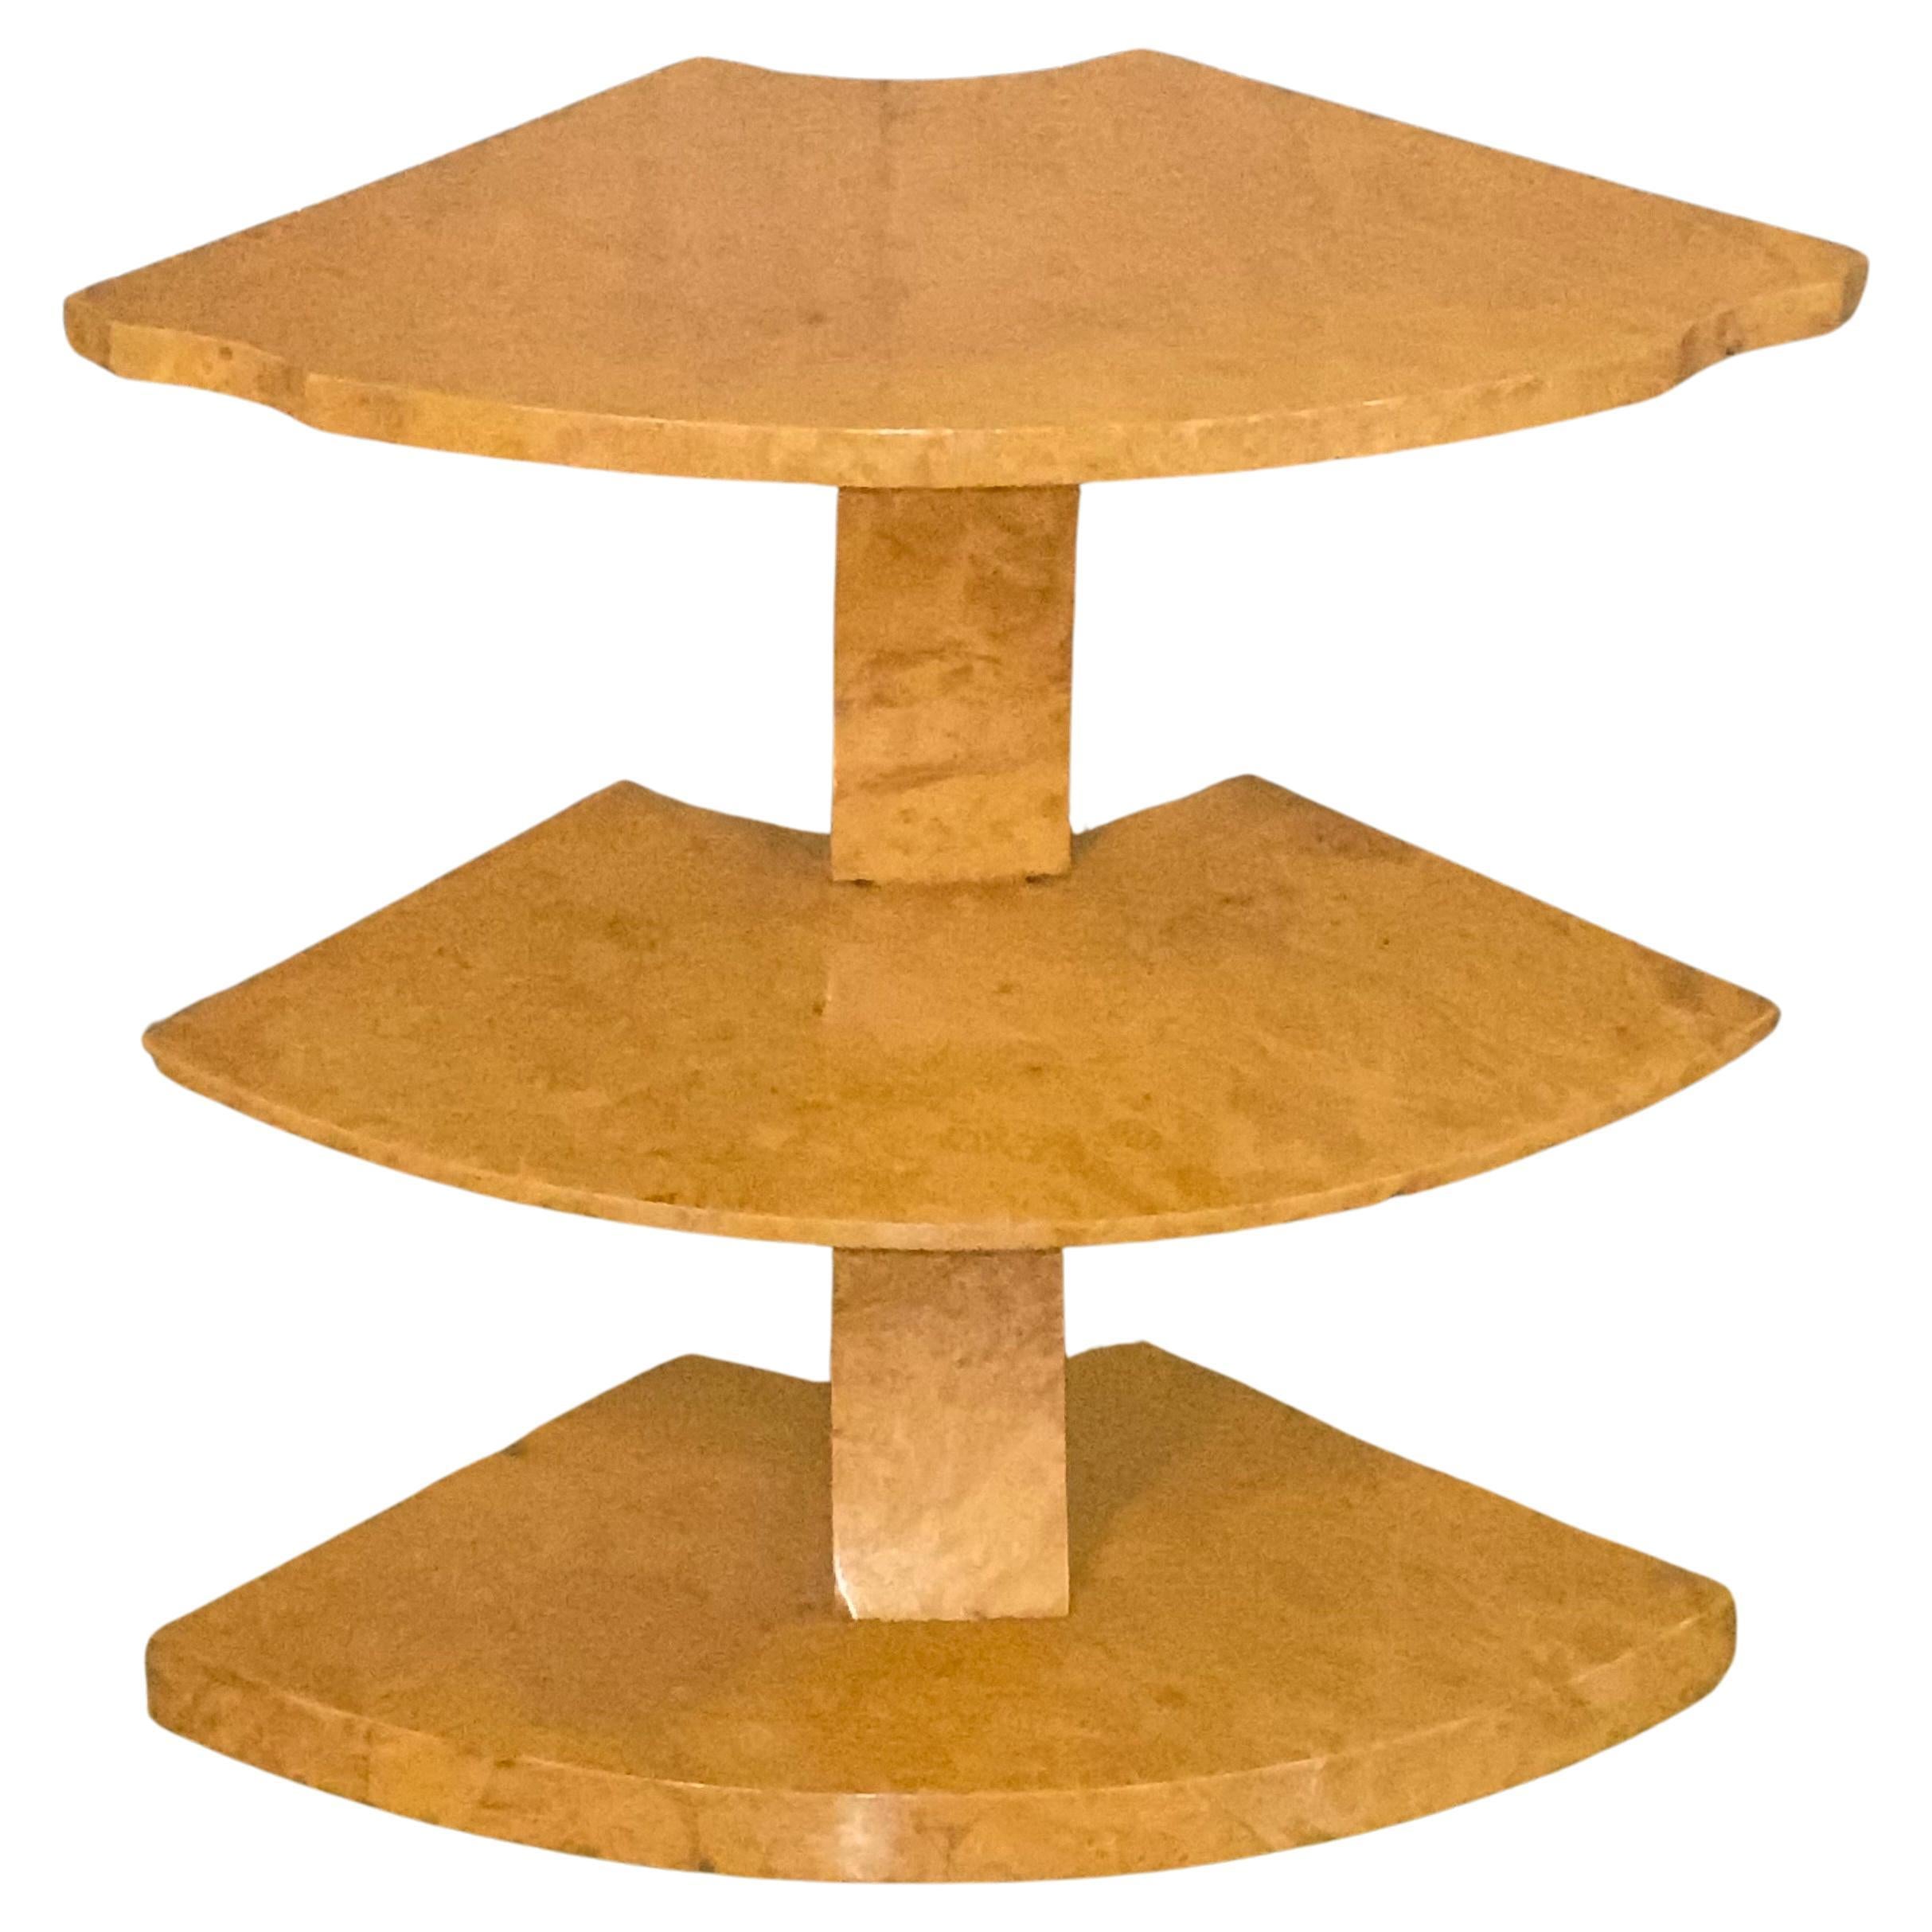 A Spectacular Art Deco Blonde Burr Maple H&L Epstein Nest of Tables Circa 1930's For Sale 5